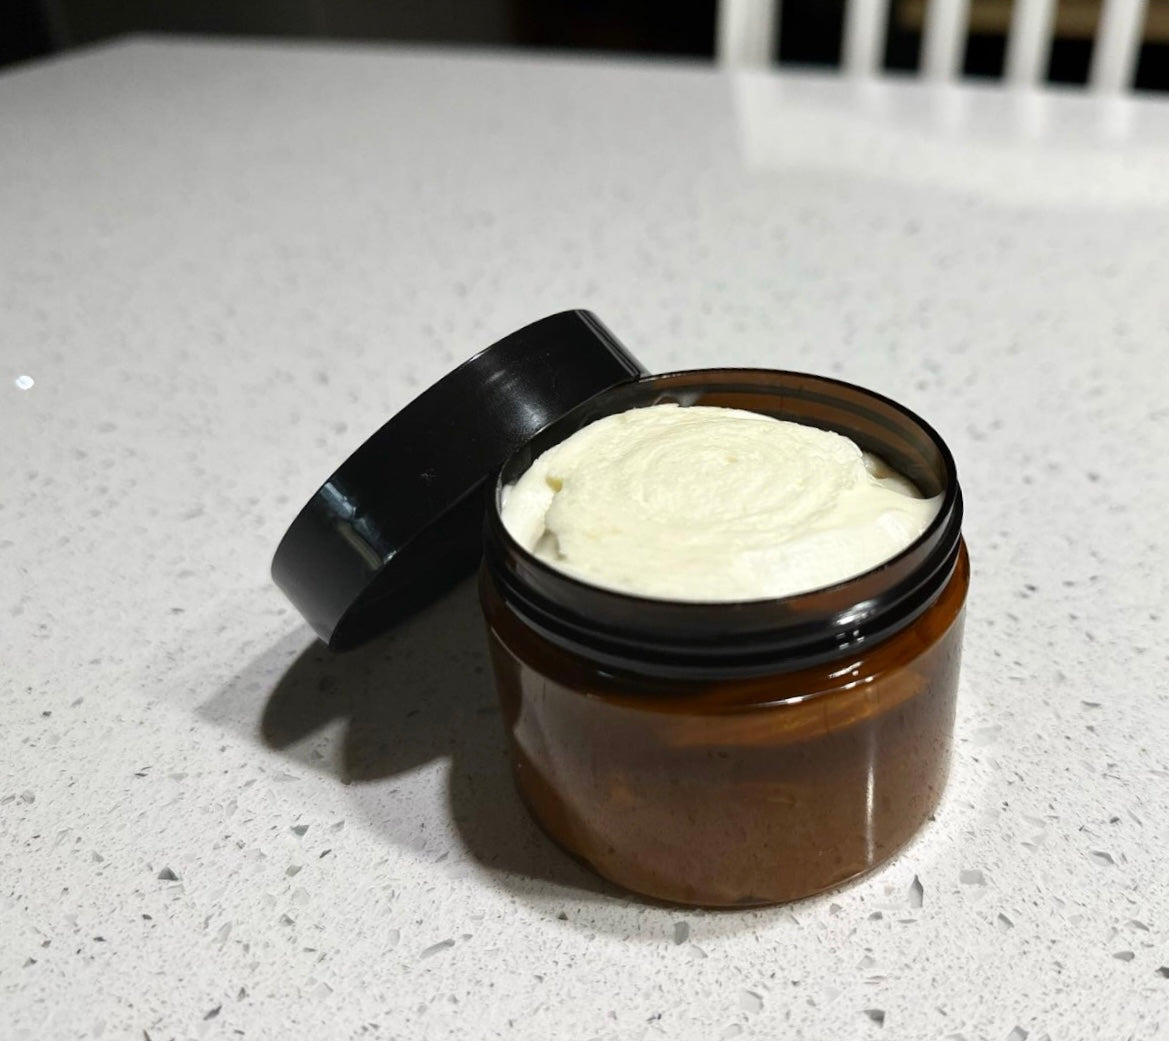 Beeswax-Based Skin Care Products - Lisa Betty - Medium